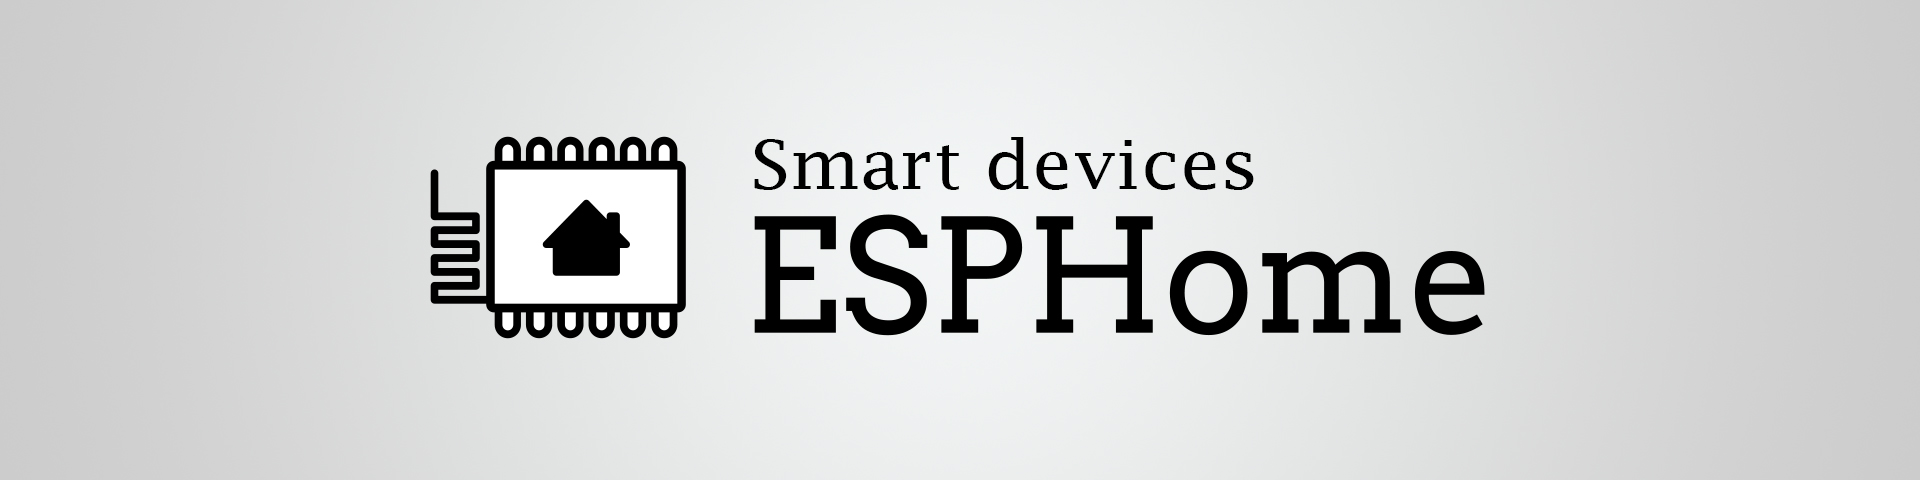 Make your own smart devices with ESPHome